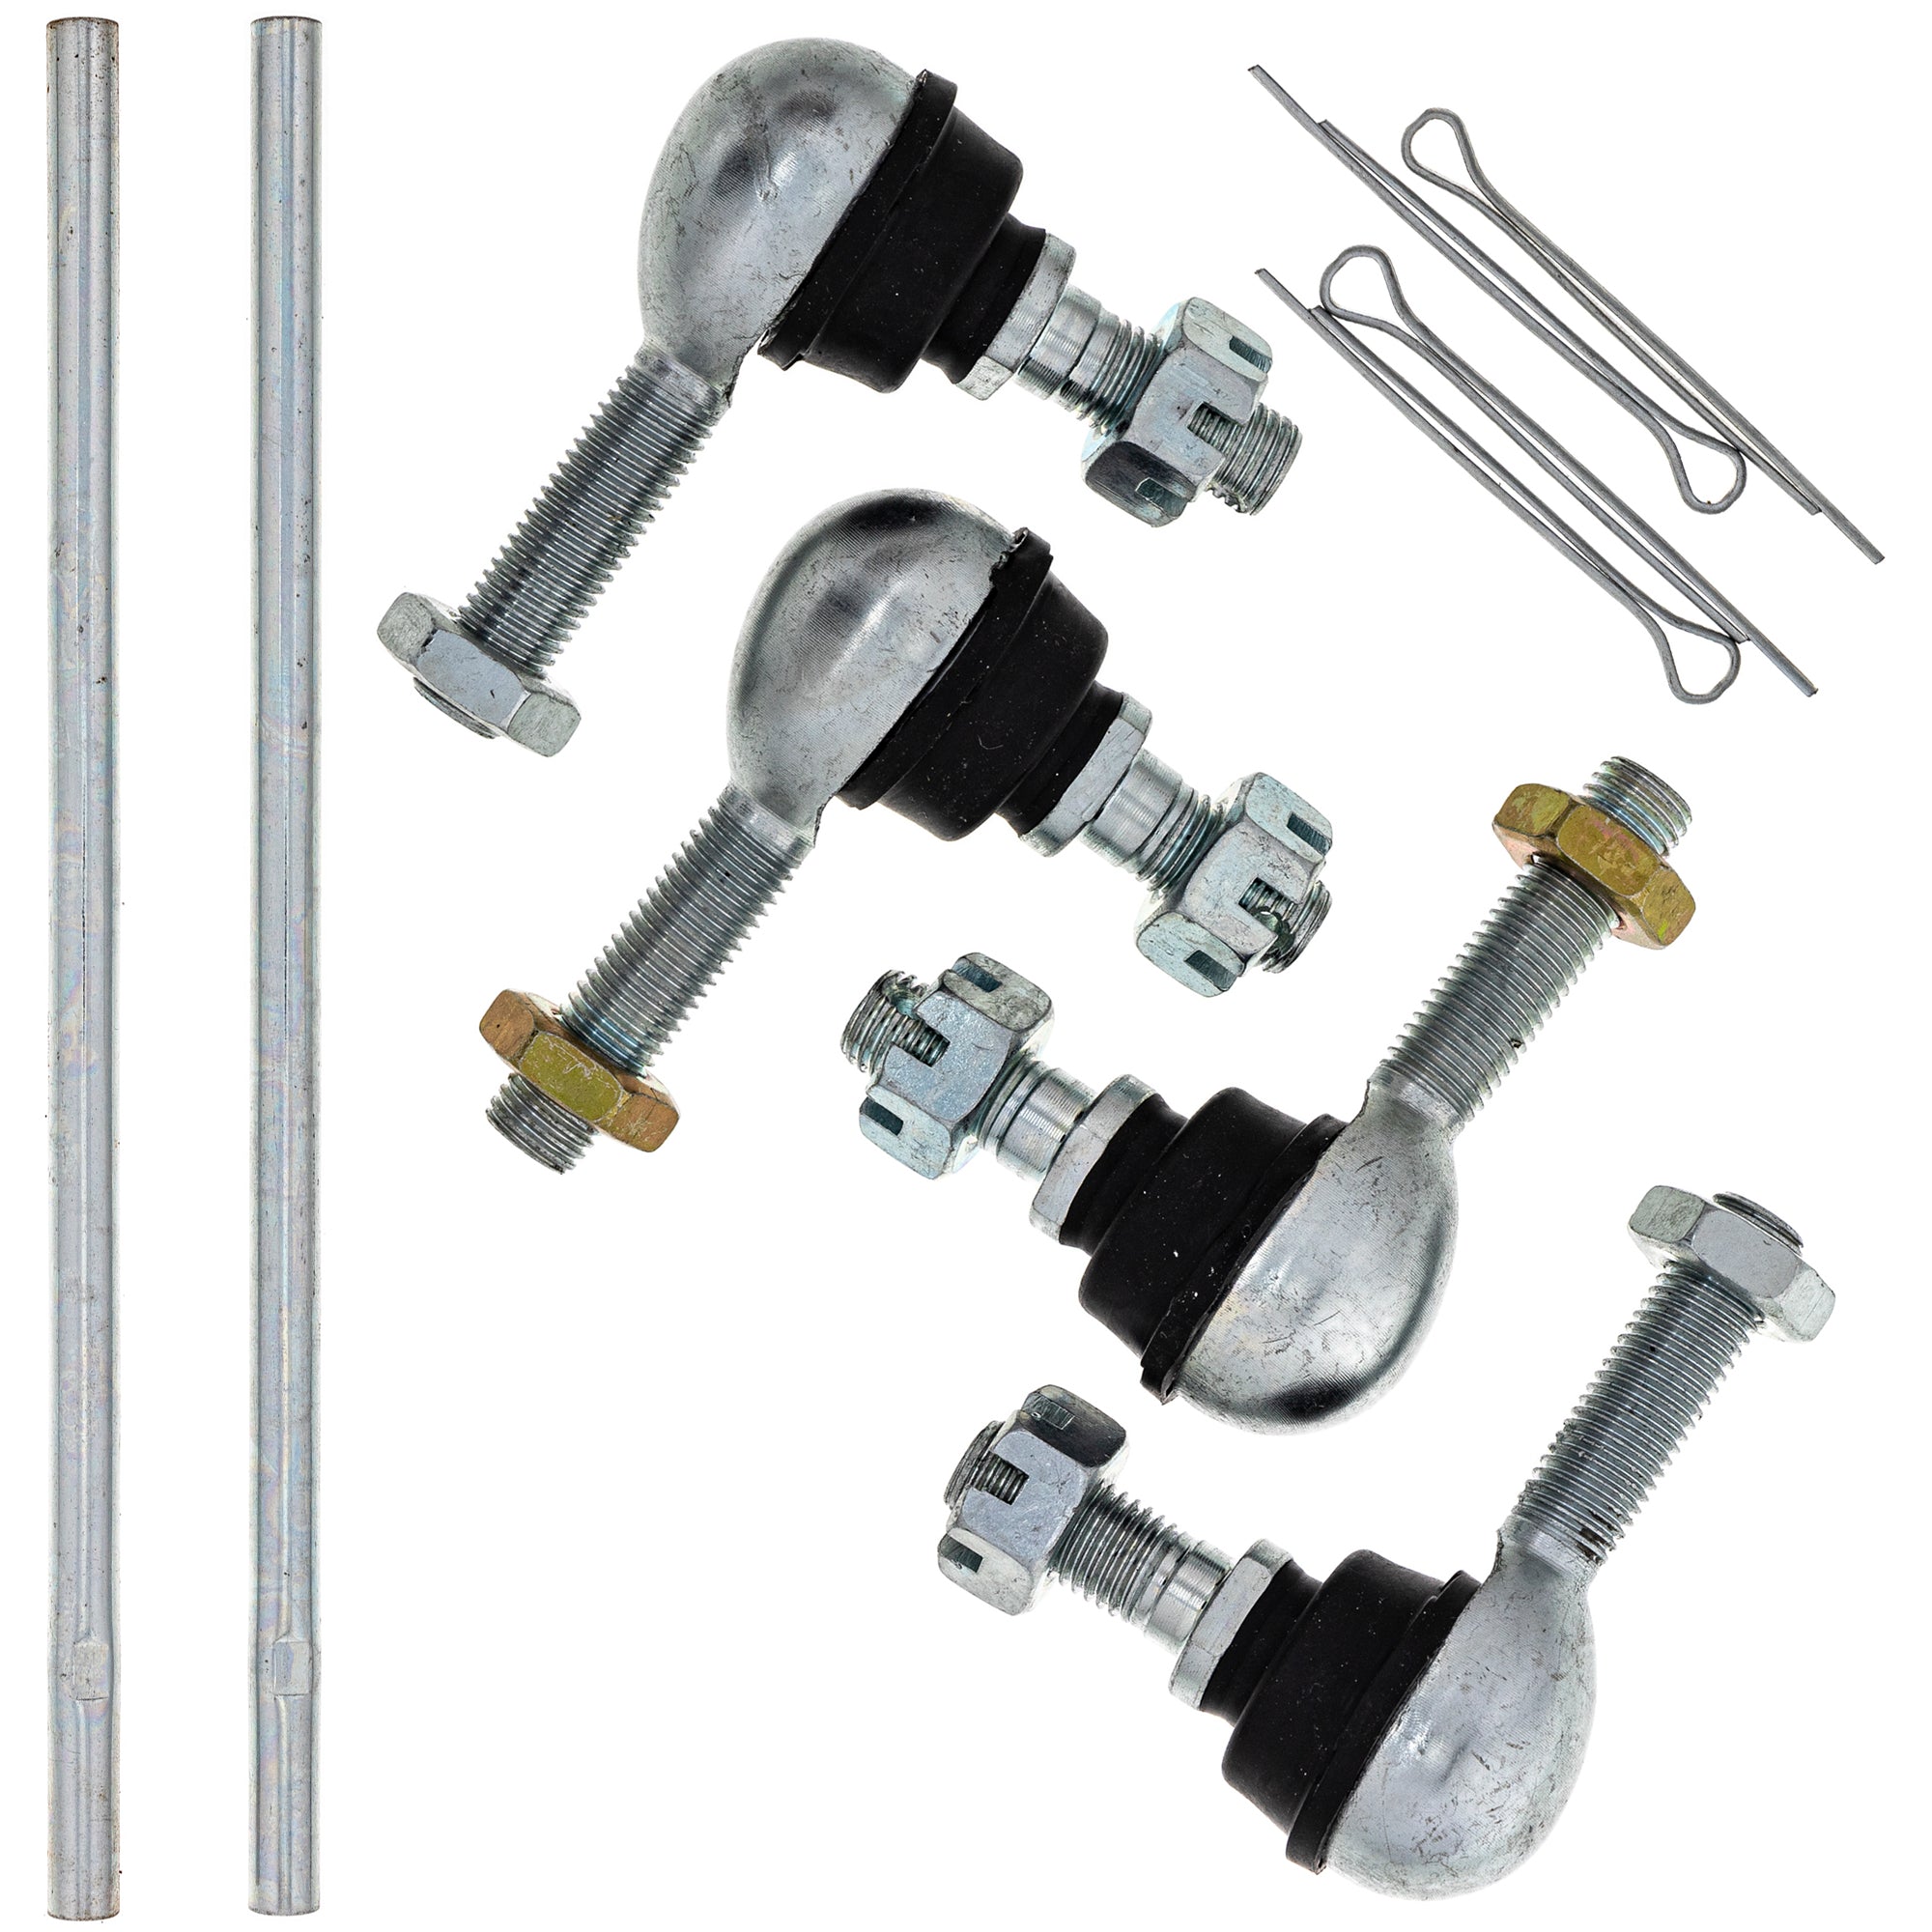 Tie Rods & Tie Rods Ends Kit for zOTHER Arctic Cat Textron Cat NICHE MK1006239